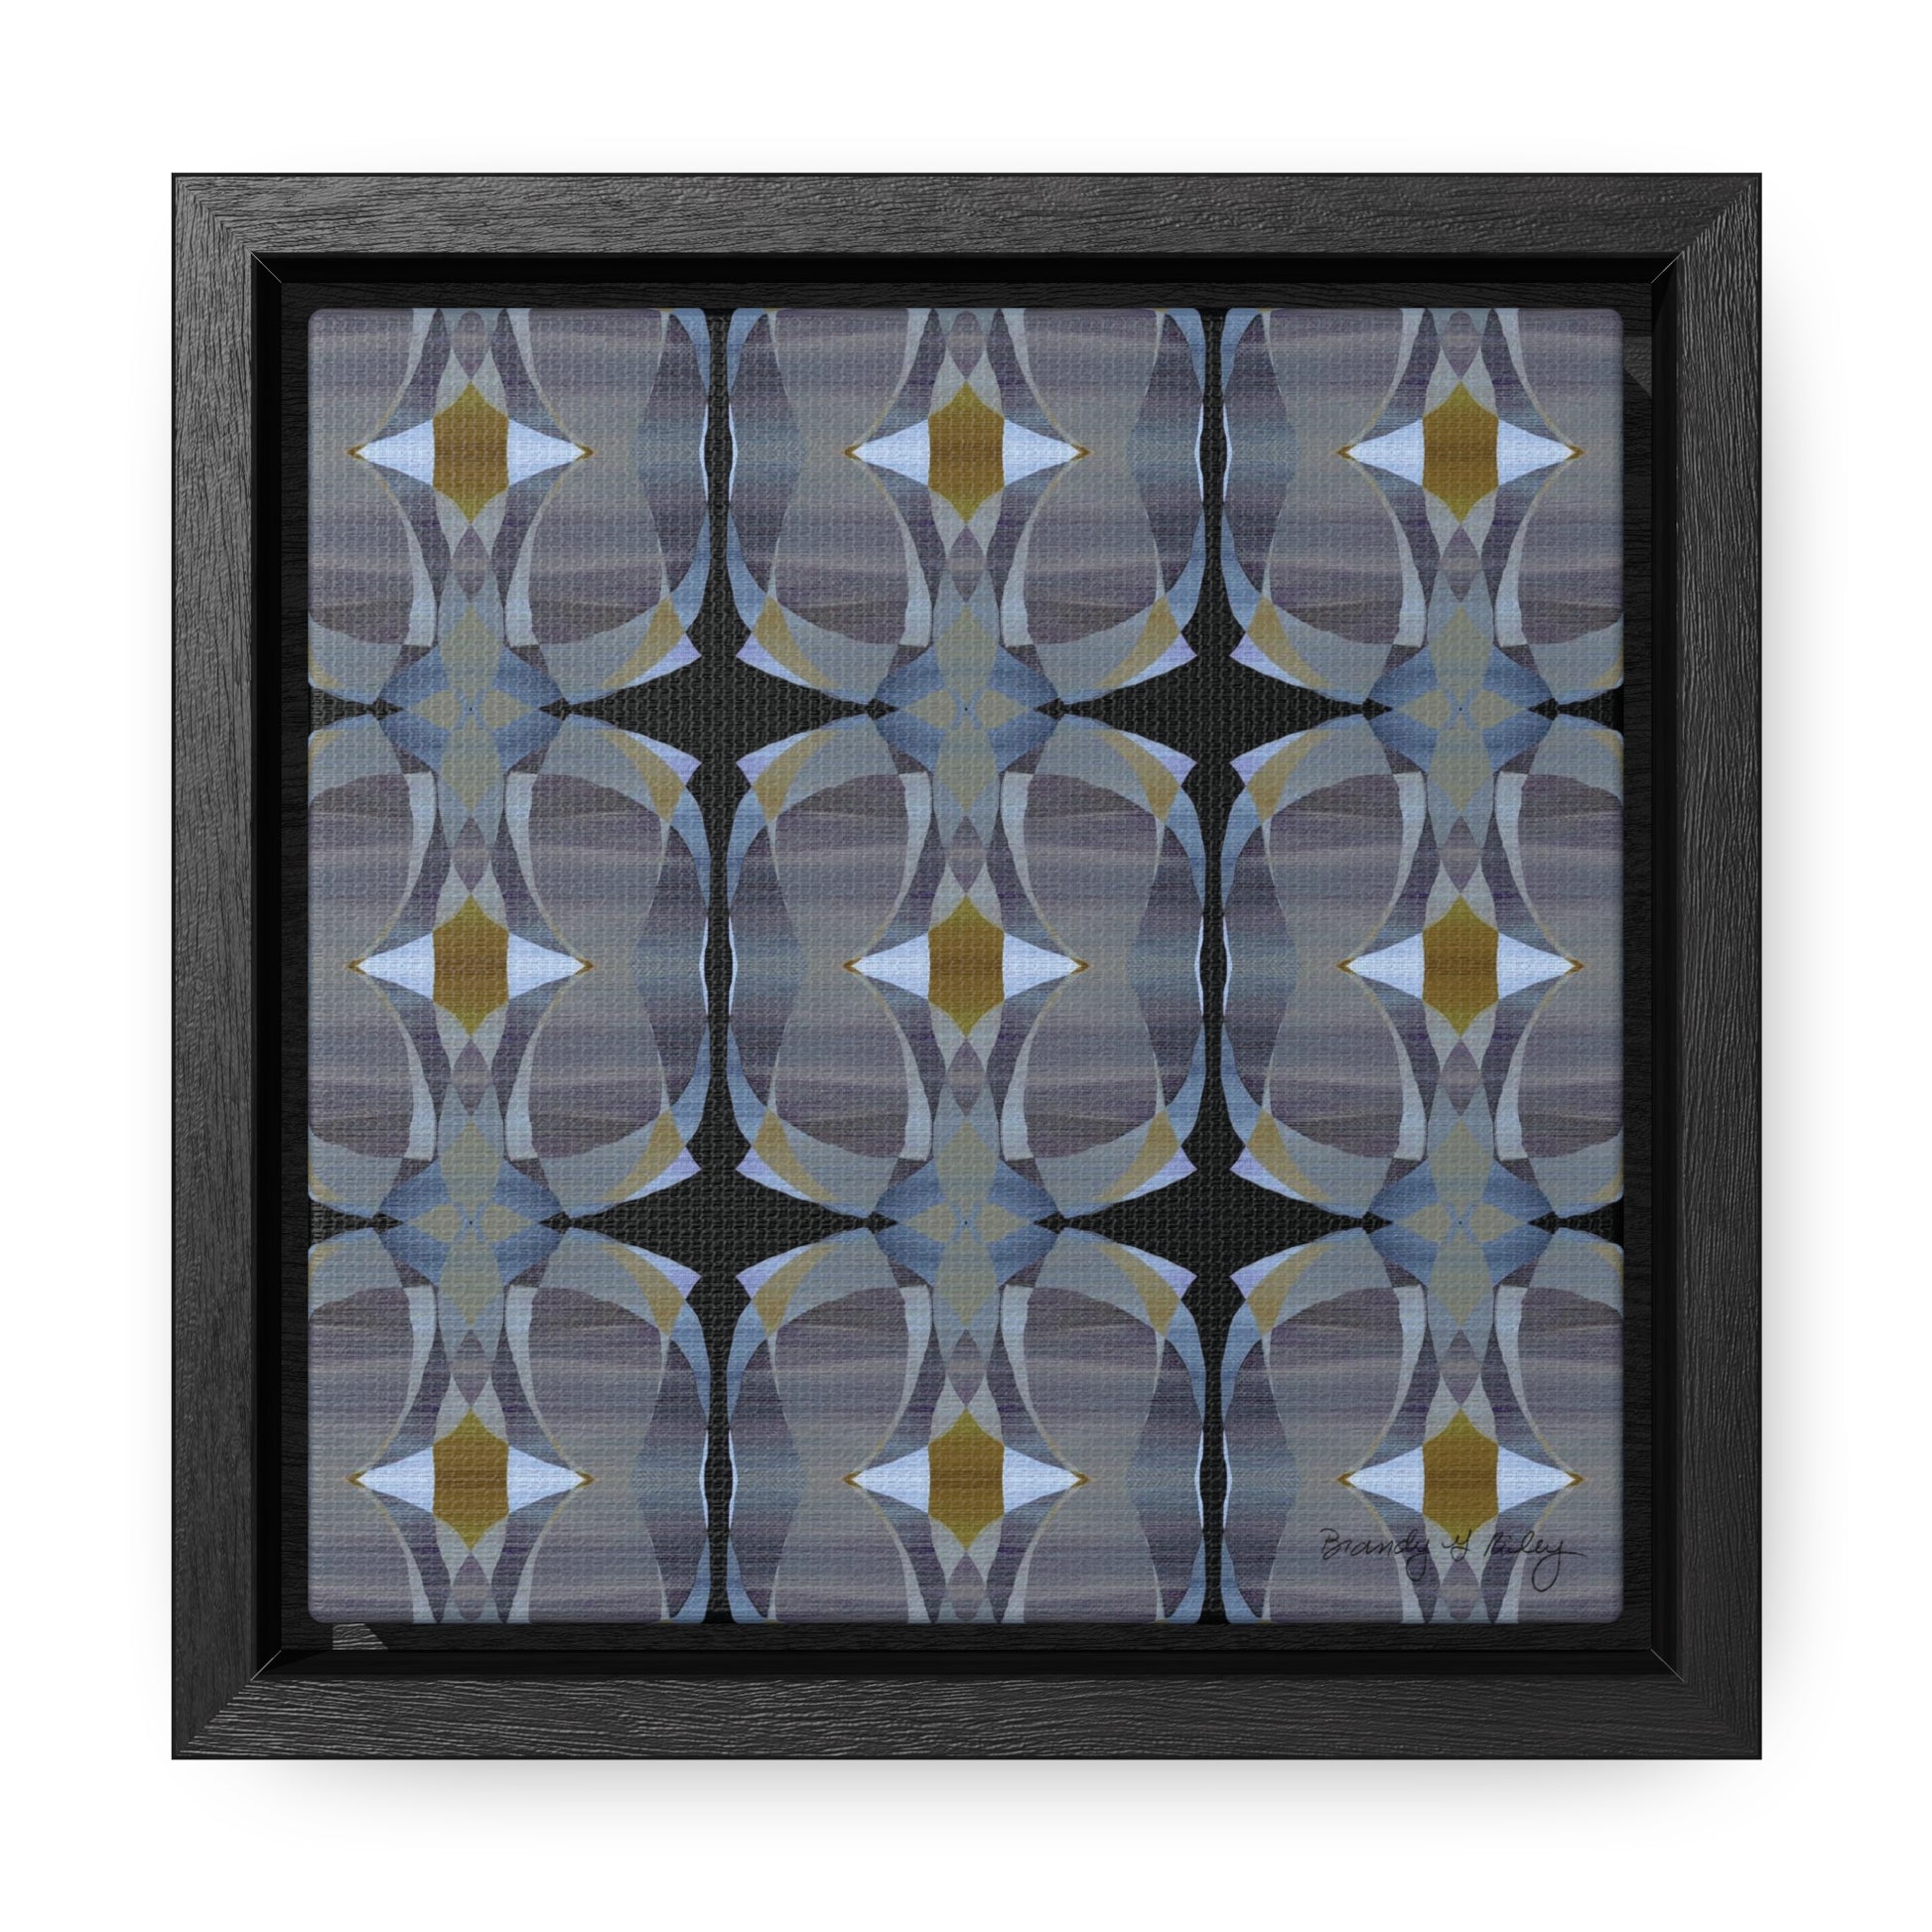 Mini stretch canvas featuring an abstract gray pattern in a black fraome